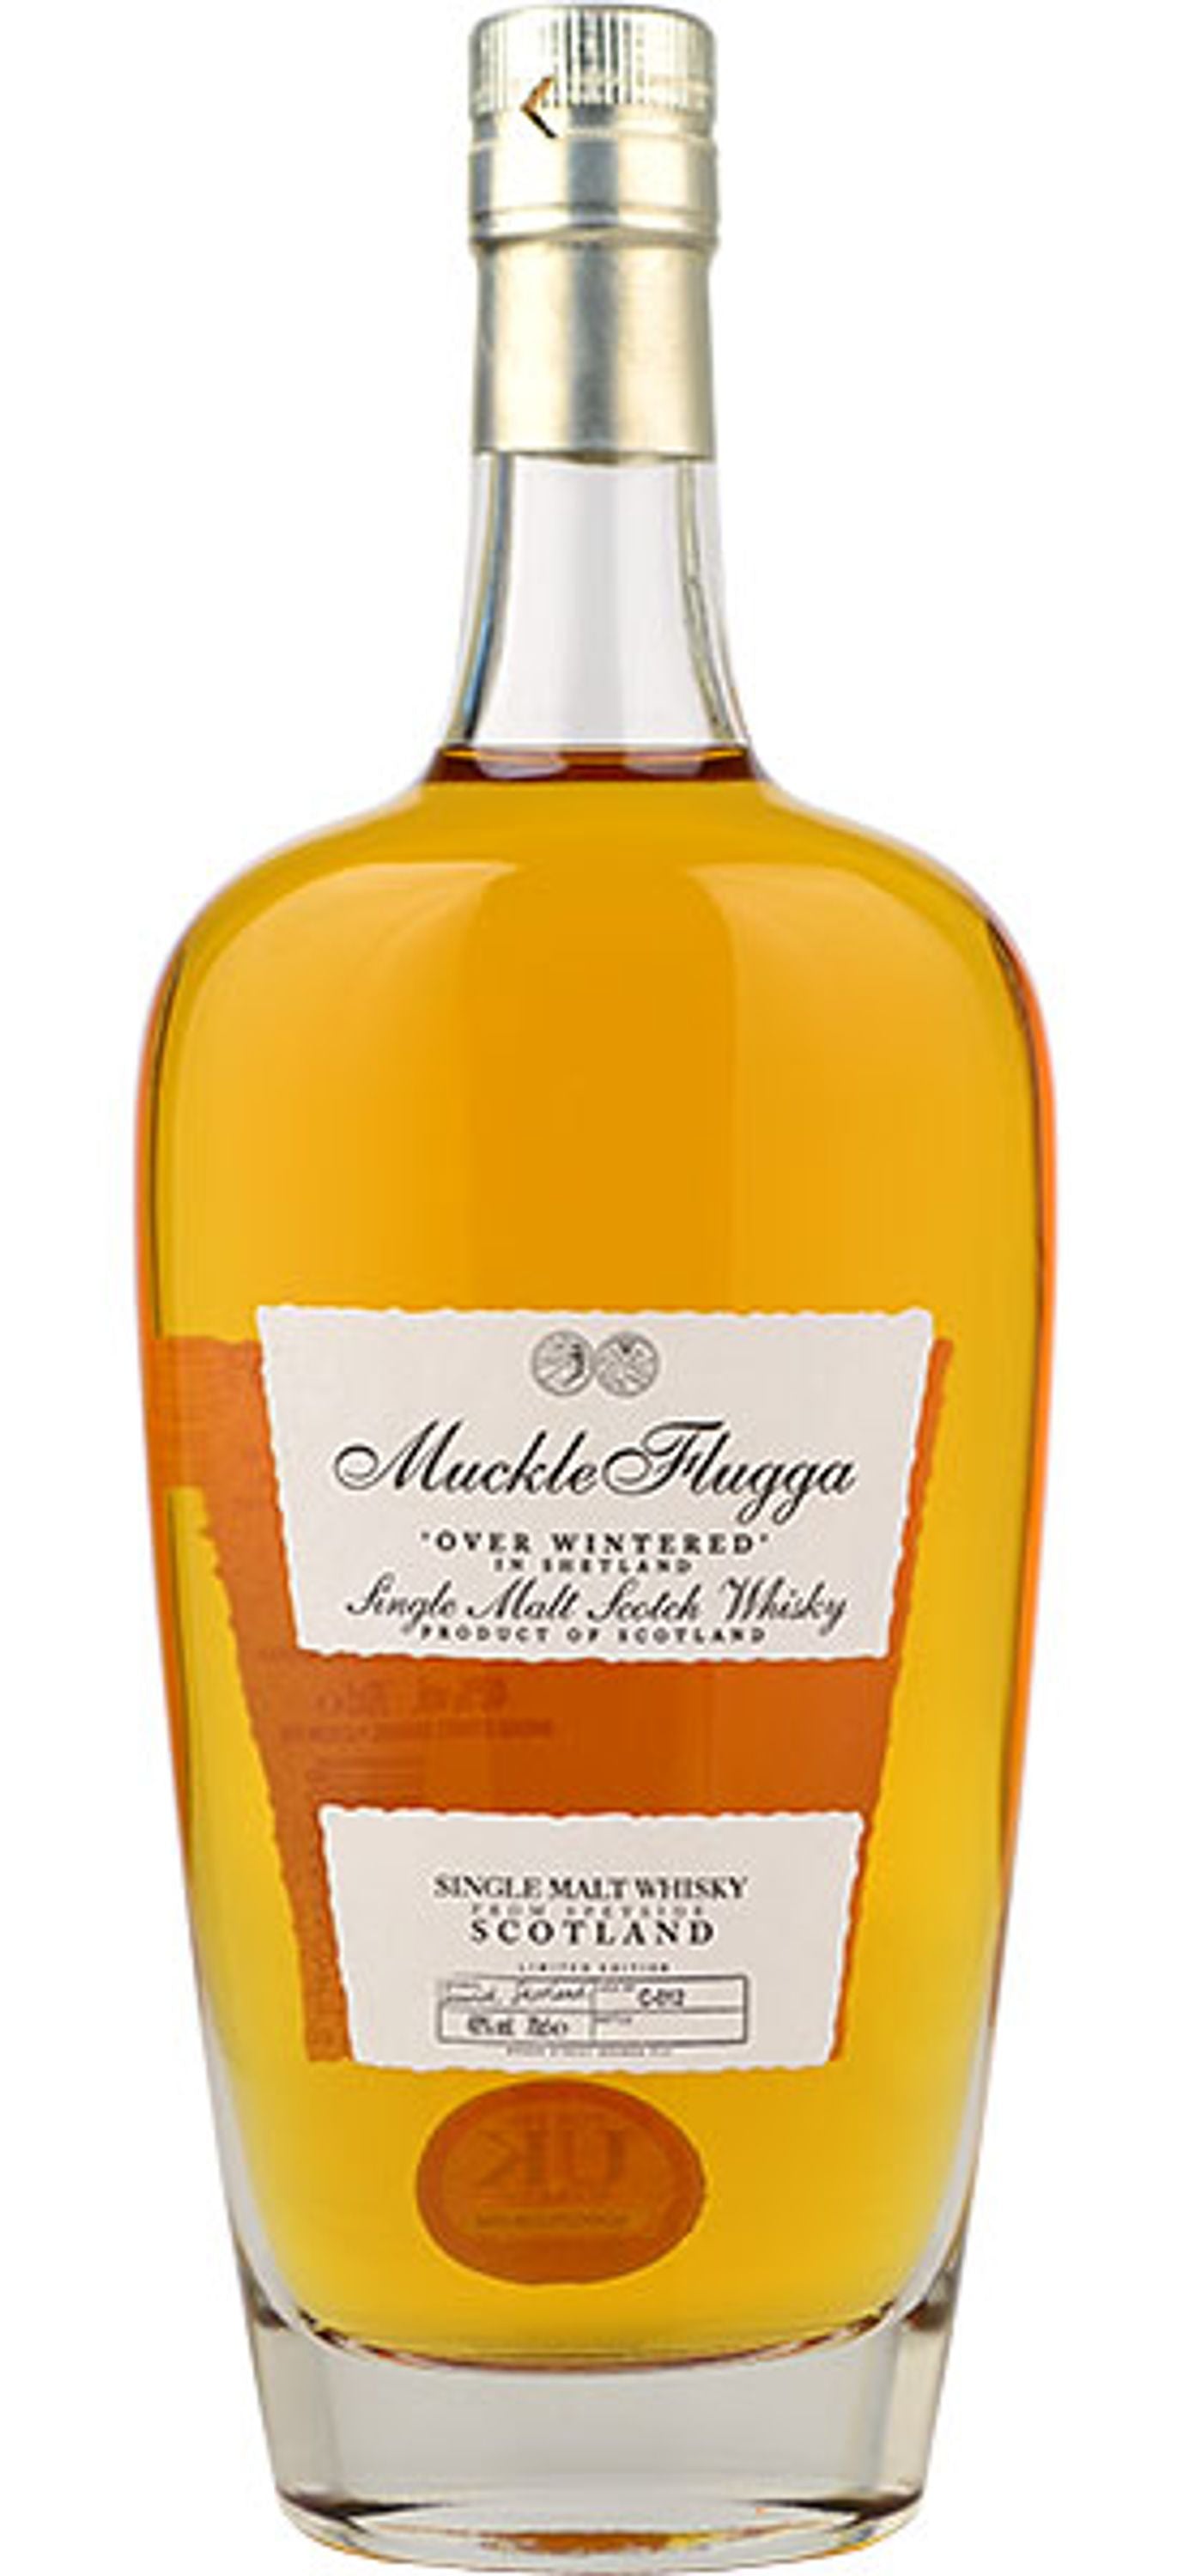 Muckle Flugga Over Wintered Single Malt Scotch Whiskey 0.7l, alc. 40% by volume